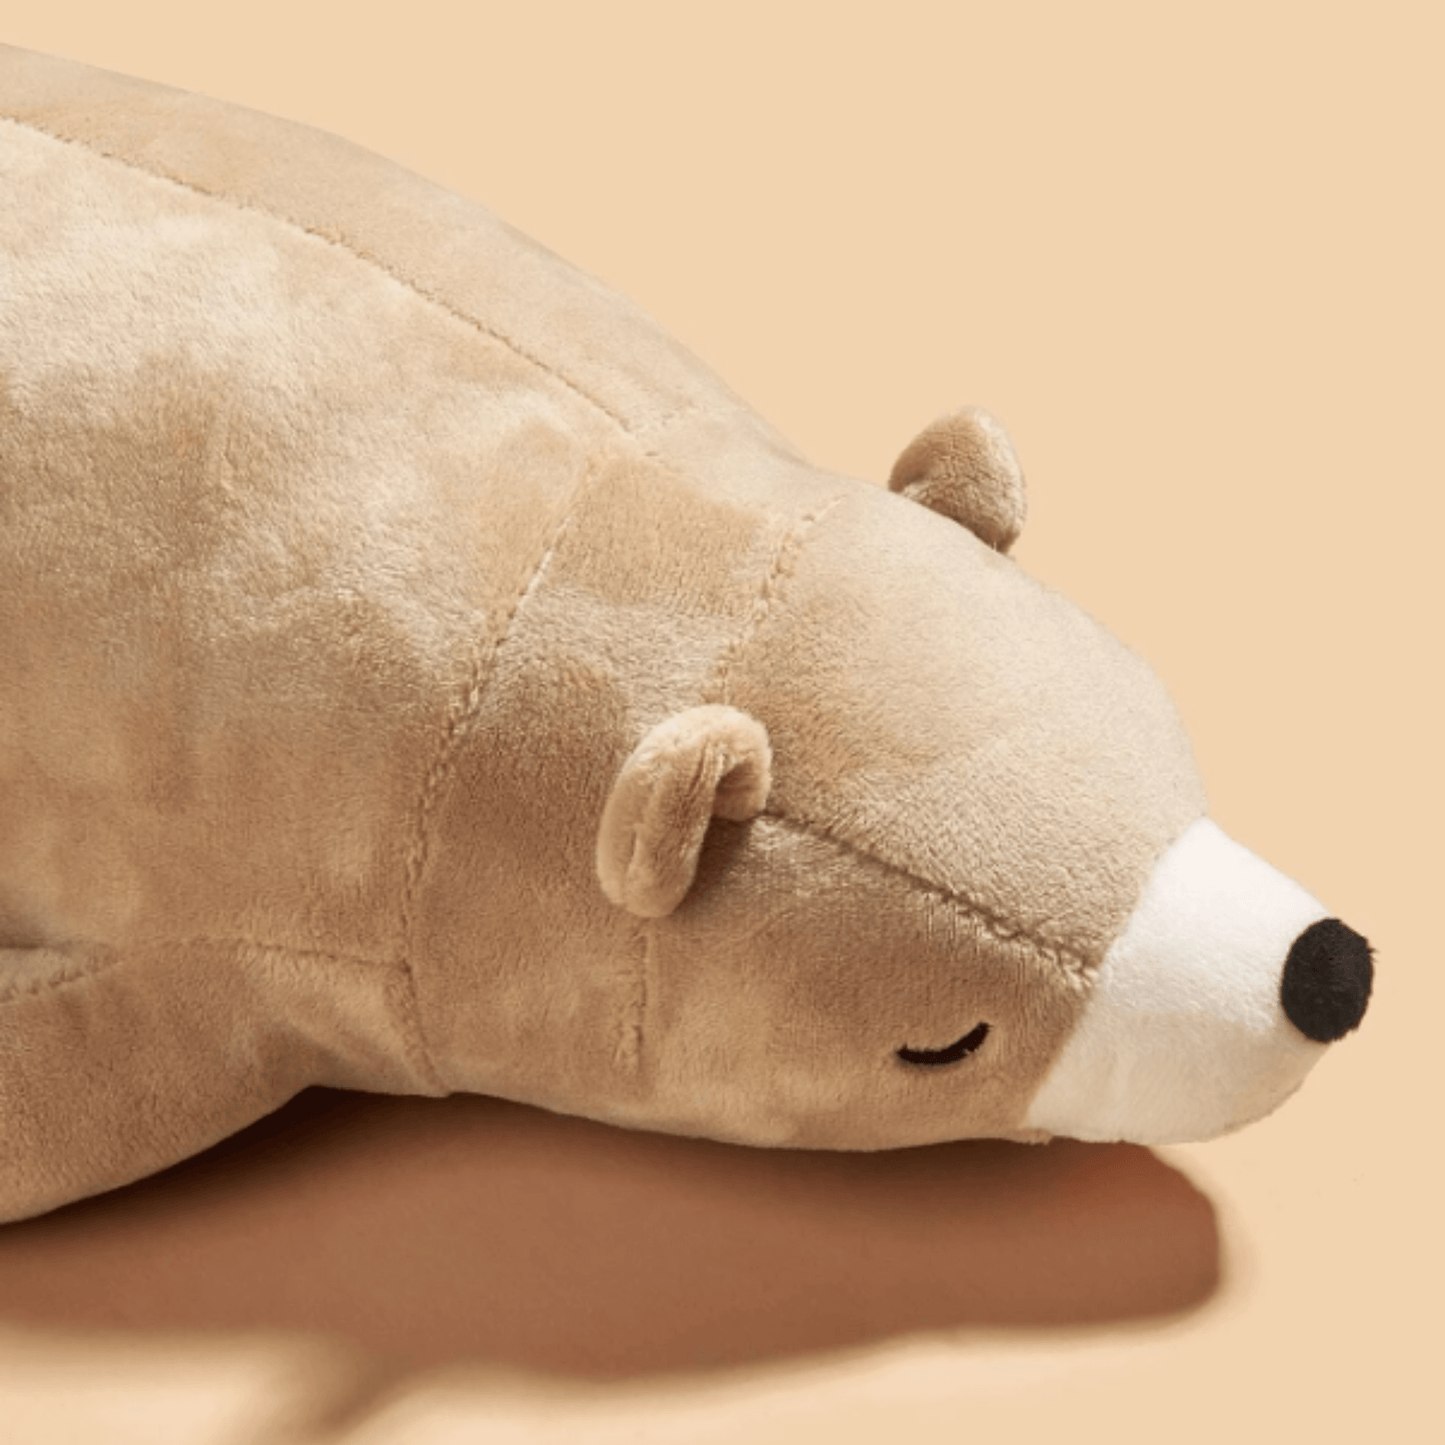 A brown teddy bear dog toy with a squeaker inside. The toy is made of soft plush material and has a long tail. It is perfect for cuddling and provides a sense of security for dogs who are feeling stressed or anxious.